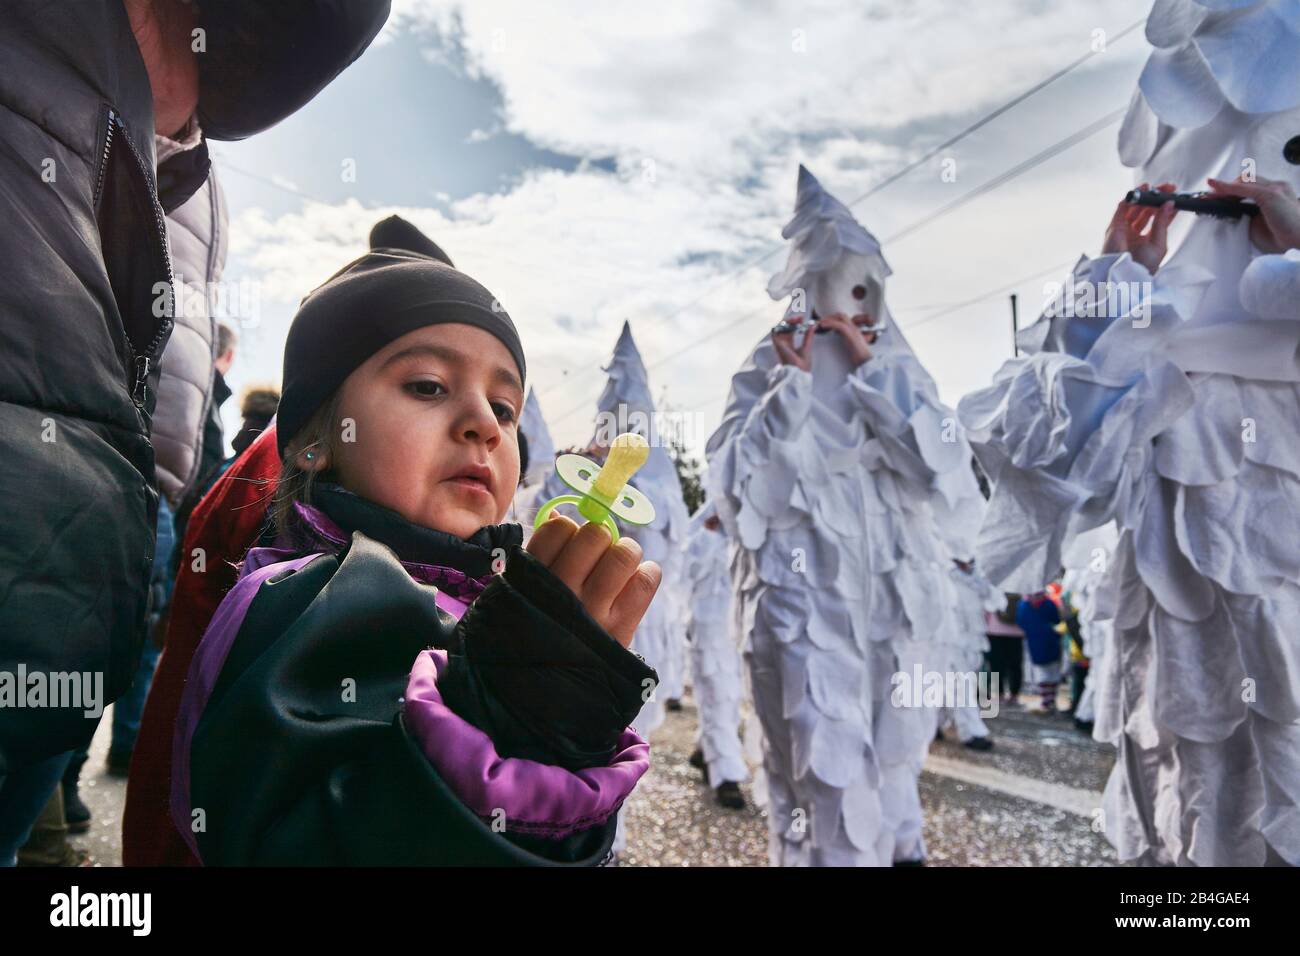 Europe, Switzerland, Basel, Traditional event, Basel Fasnacht, the largest in Switzerland, intangible cultural heritage of mankind, Cortège at Wettsteinplatz, spectator, child with pacifier in front of Pfeifer clique Stock Photo